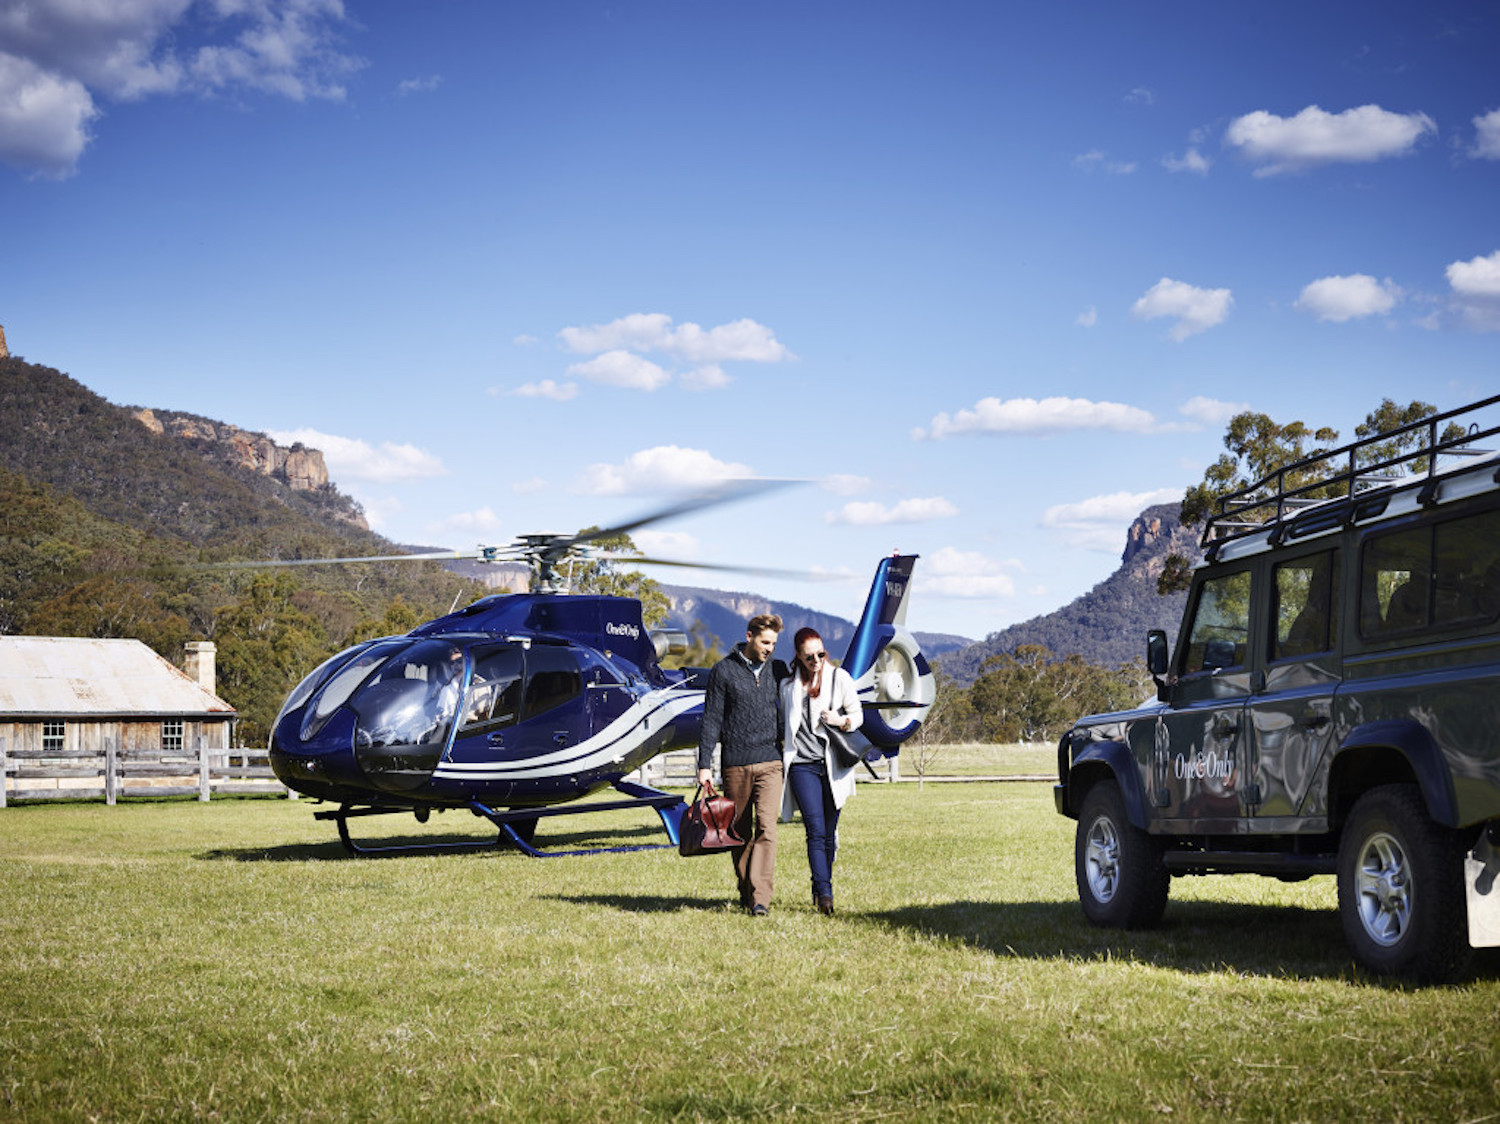 Arrive by helicopter to Emirates One&Only Wolgan Valley in the Blue Mountains